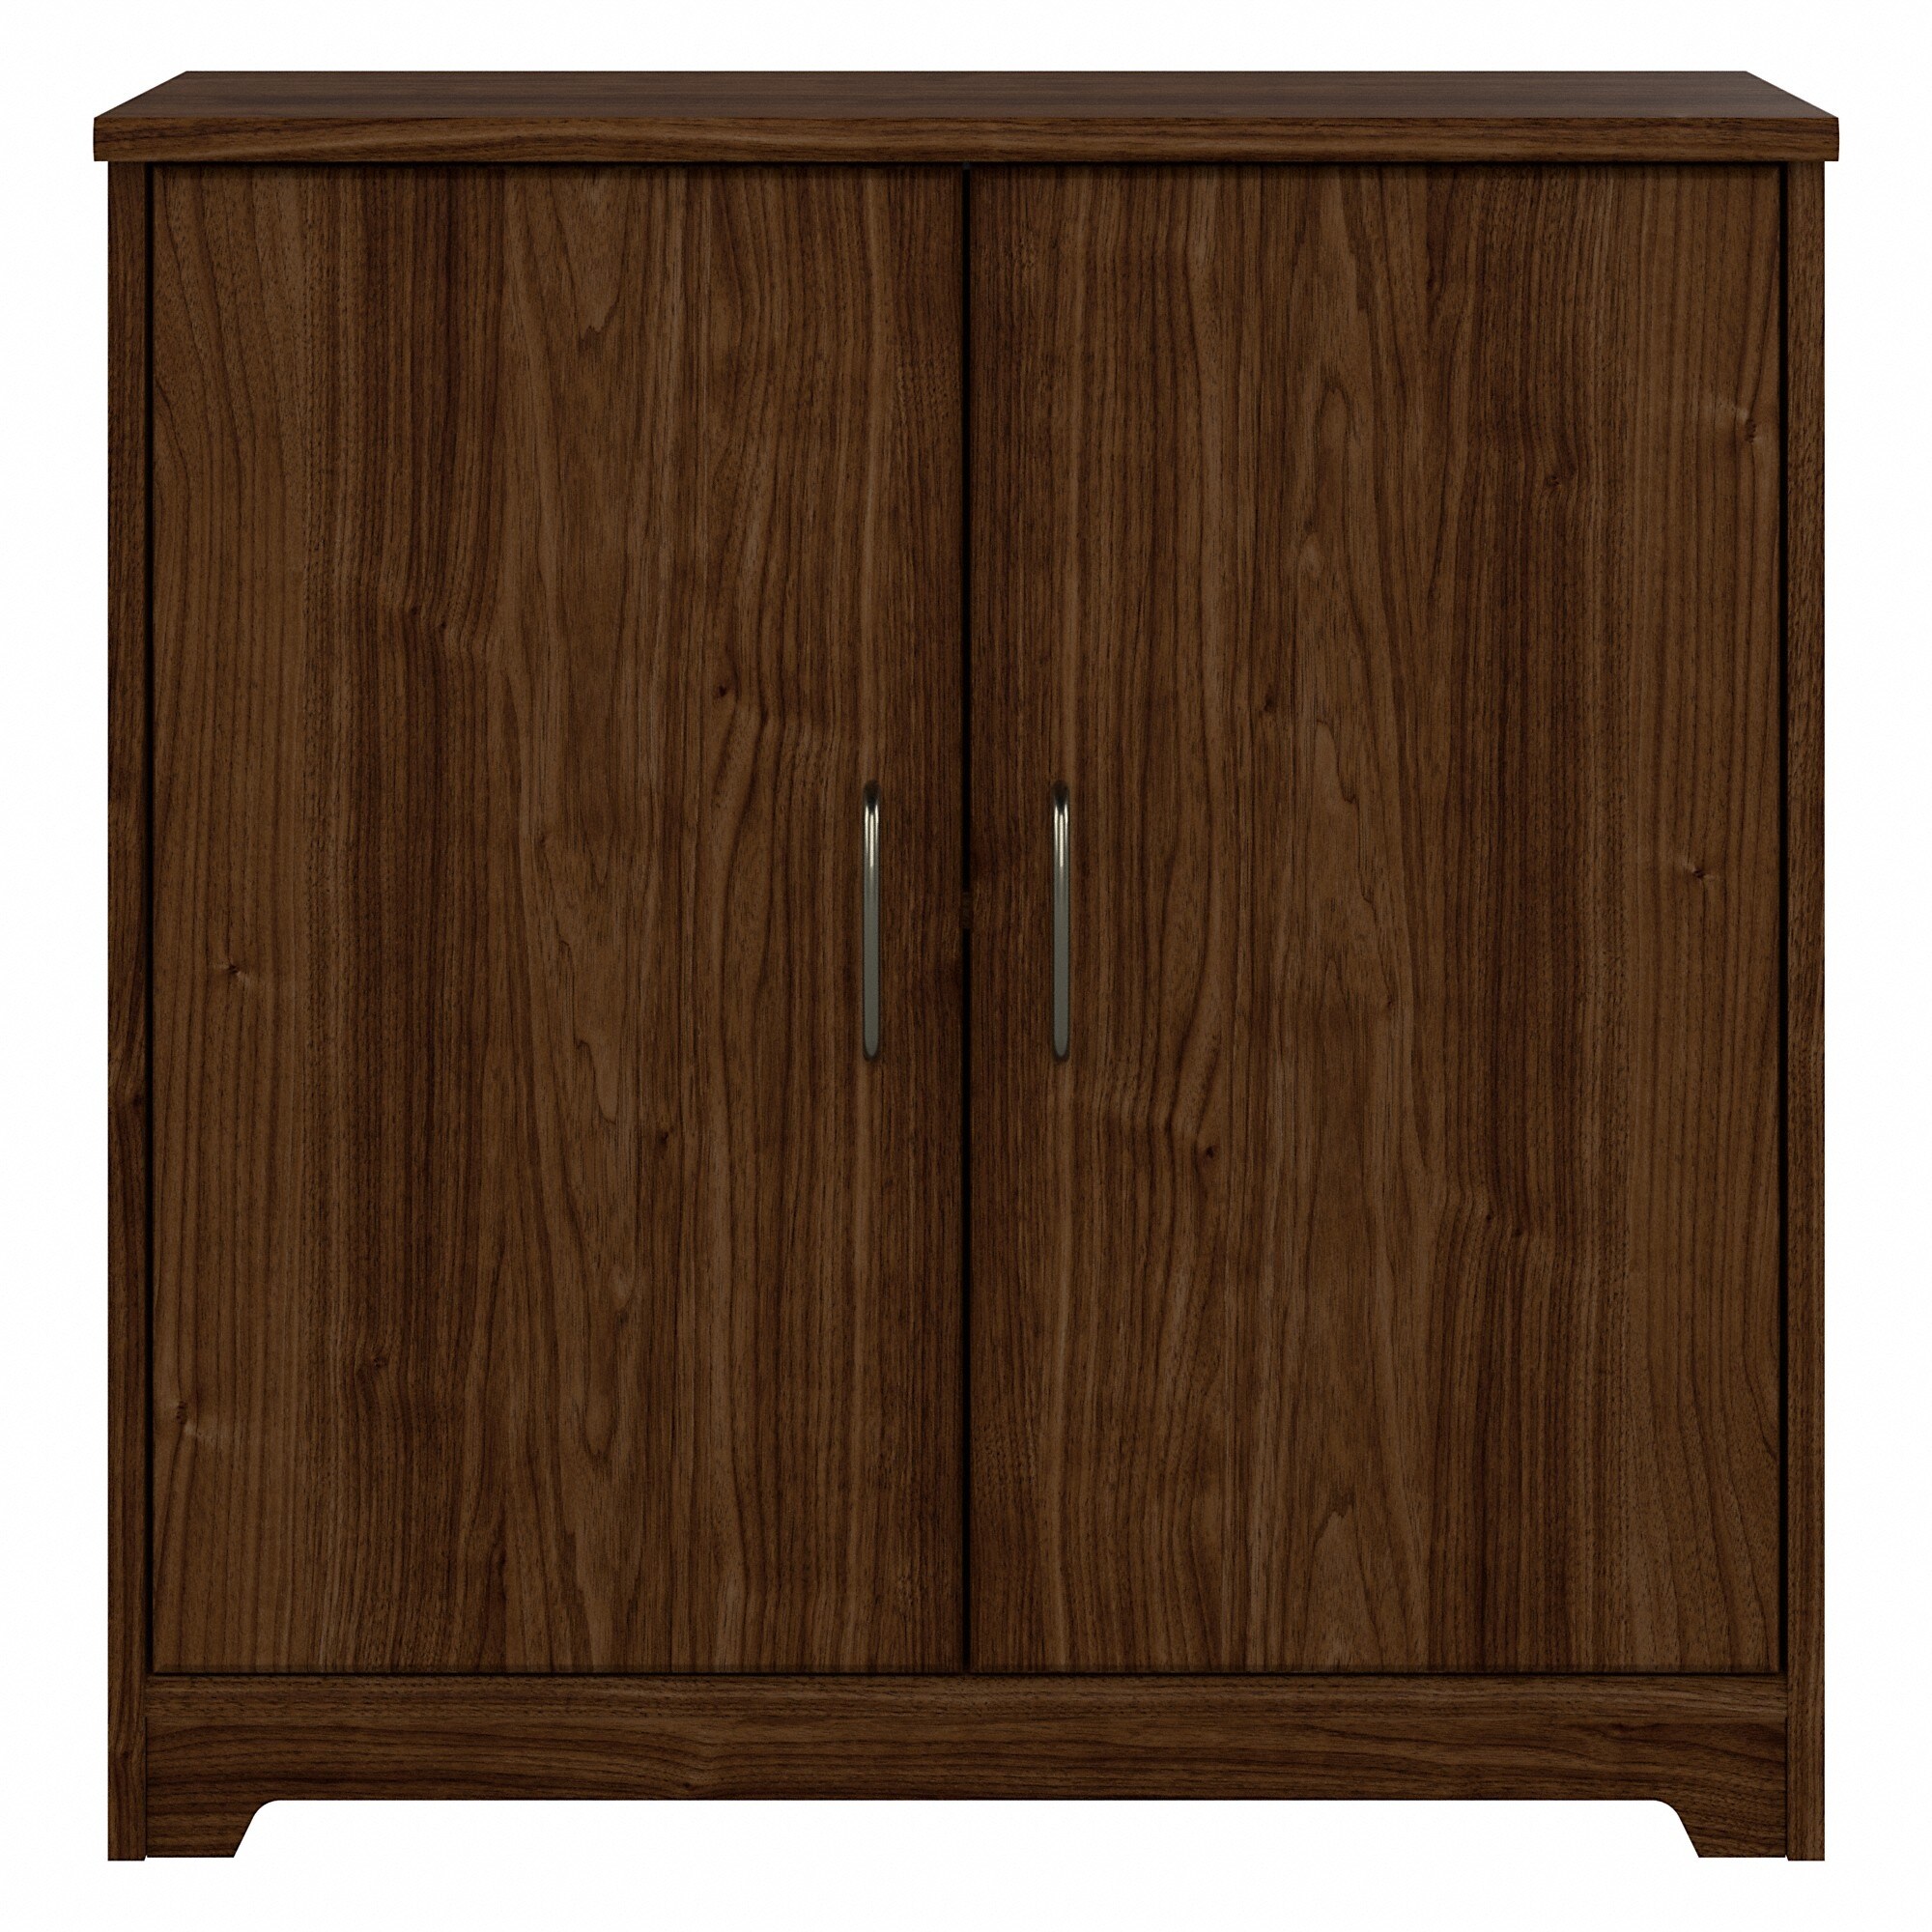 https://ak1.ostkcdn.com/images/products/is/images/direct/361c17c2a42393fe95ffbff8112ea1719d55c2bb/Cabot-Small-Entryway-Cabinet-with-Doors-by-Bush-Furniture.jpg